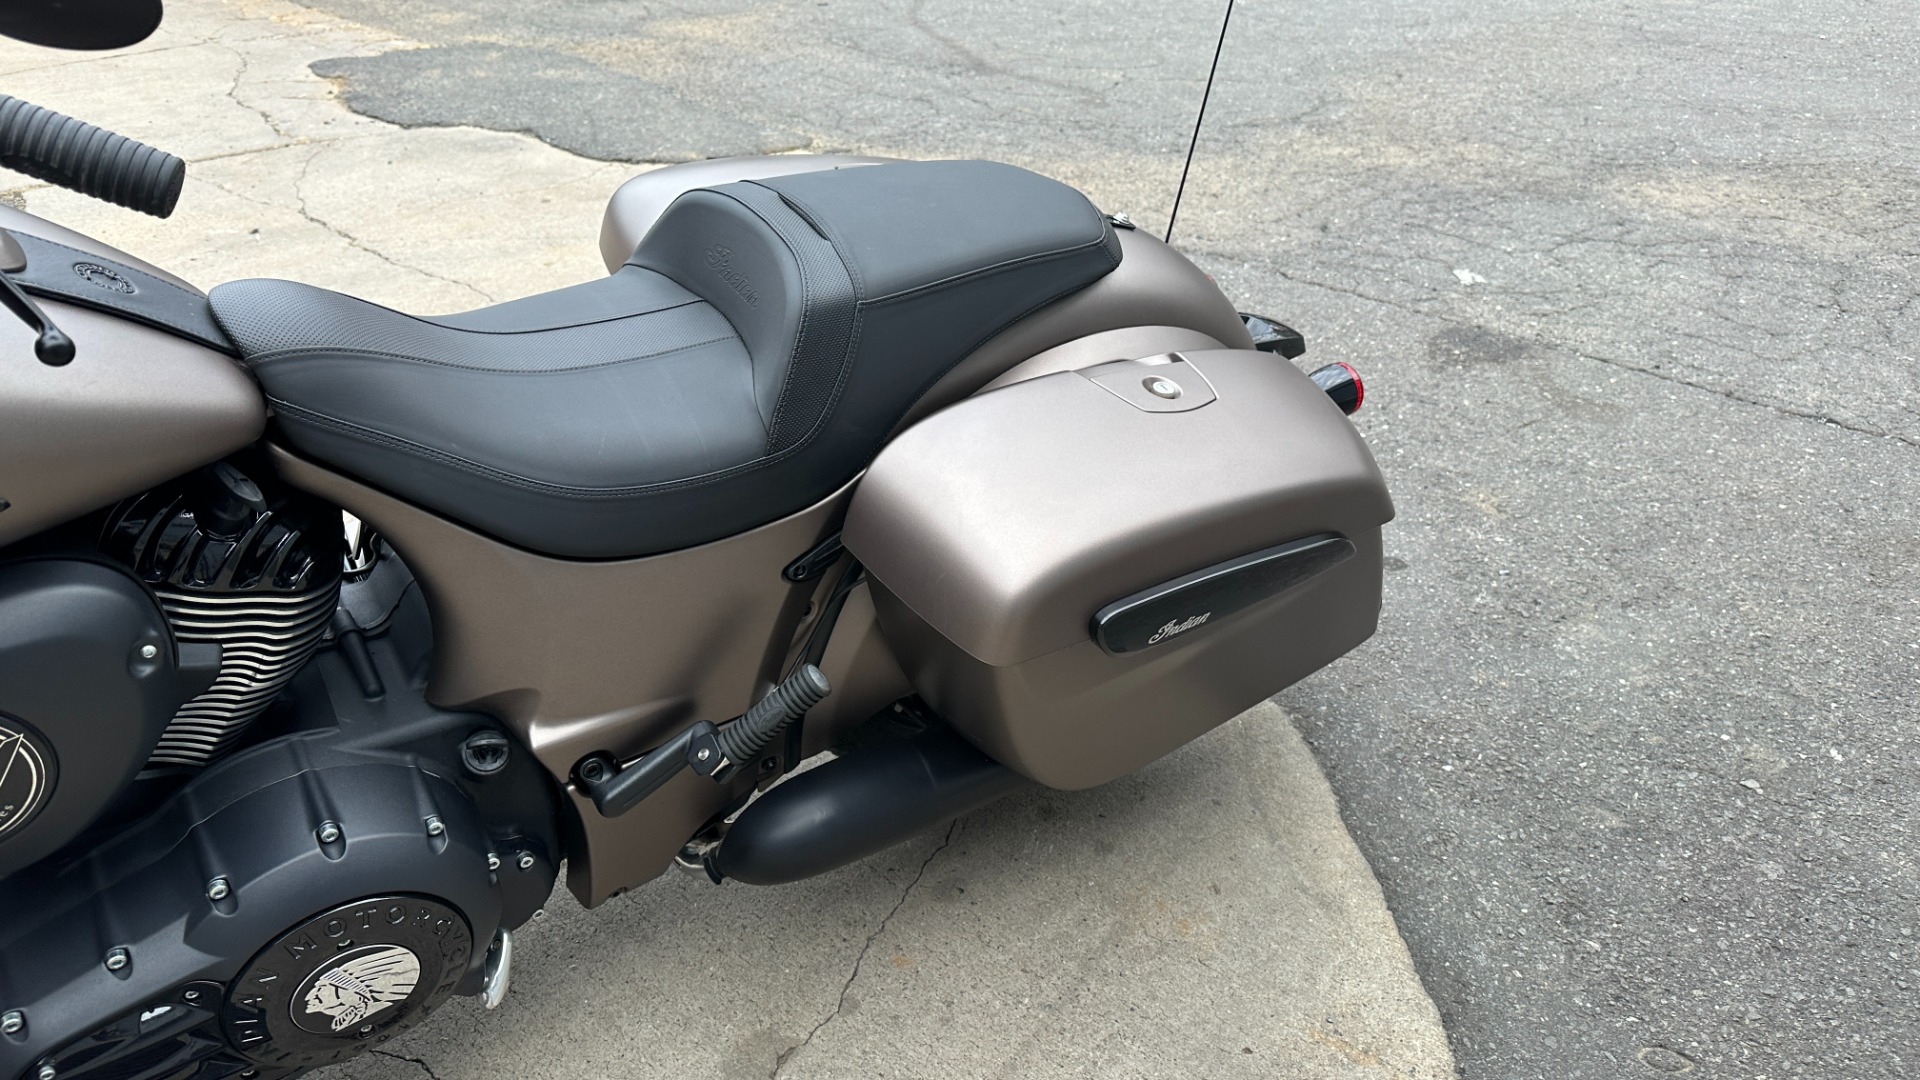 Used 2019 INDIAN CHIEFTAIN DARK HORSE / MATTE PAINT / LOW MILES / NAV / CRUISE CONTROL / TOUCHSCREEN for sale Sold at Formula Imports in Charlotte NC 28227 5